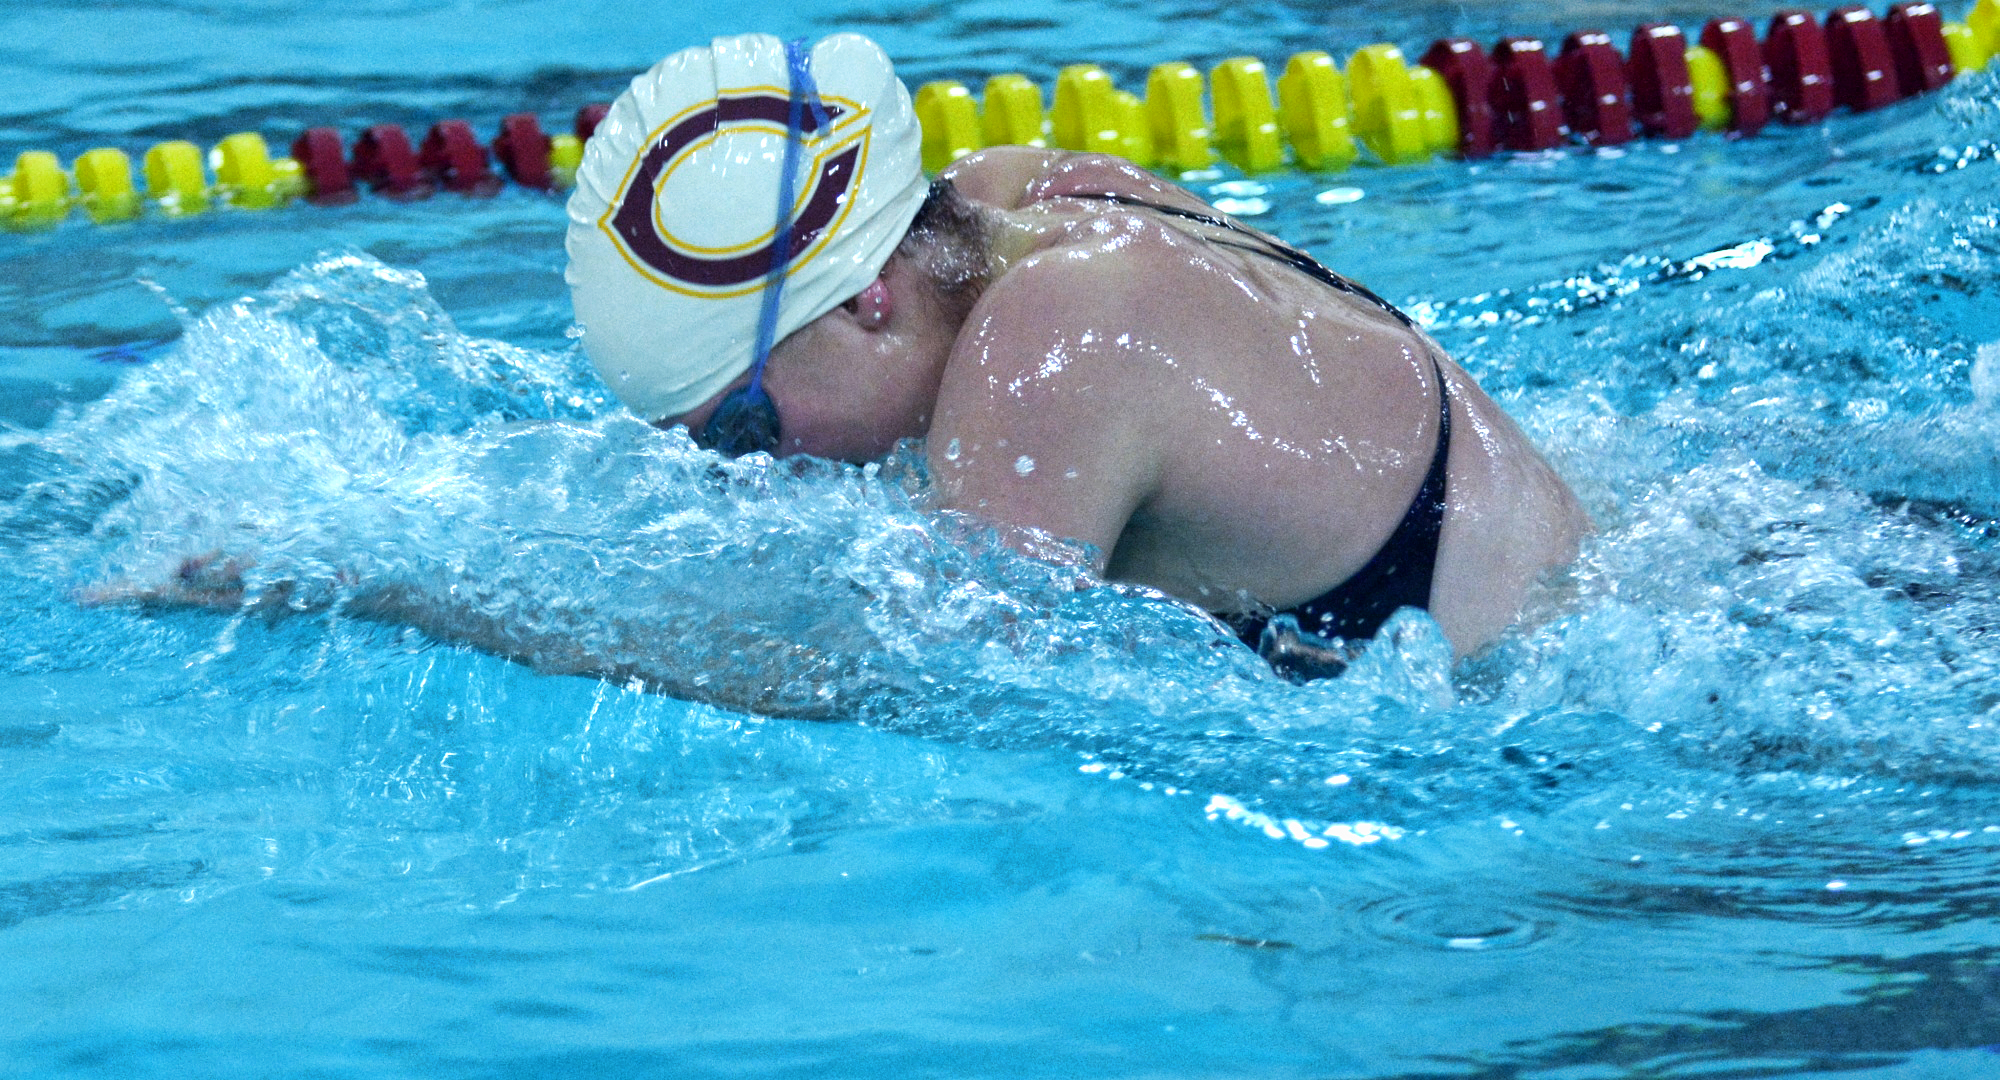 Concordia opened the 2018-19 season by competing in a pair of invites in Nebraska.